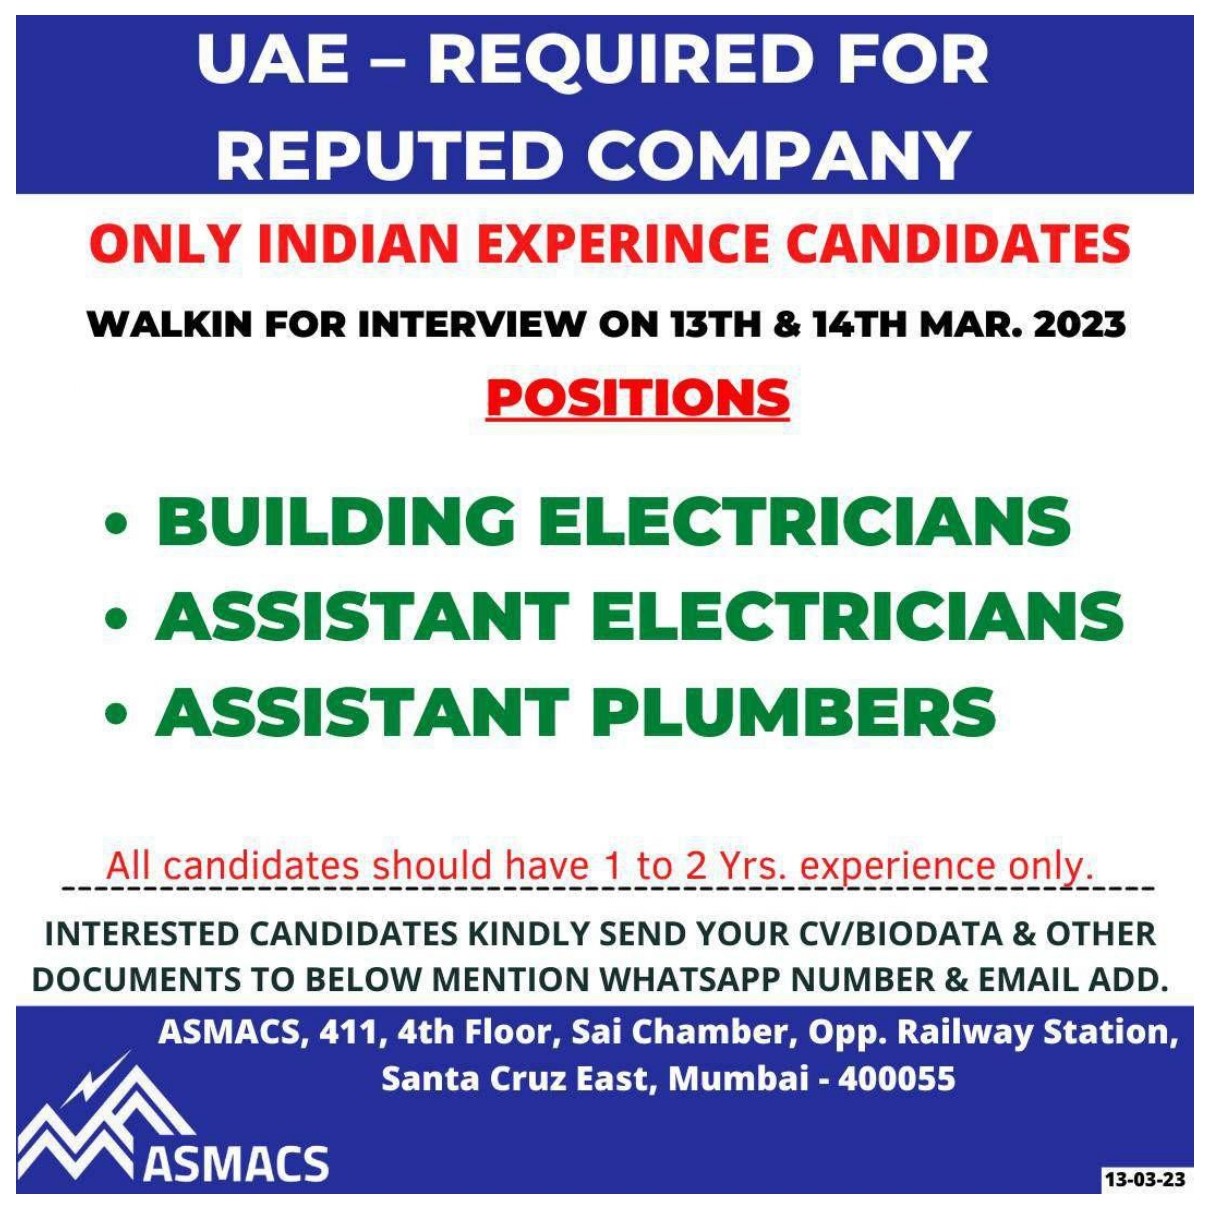 Only Indian Exp. for UAE